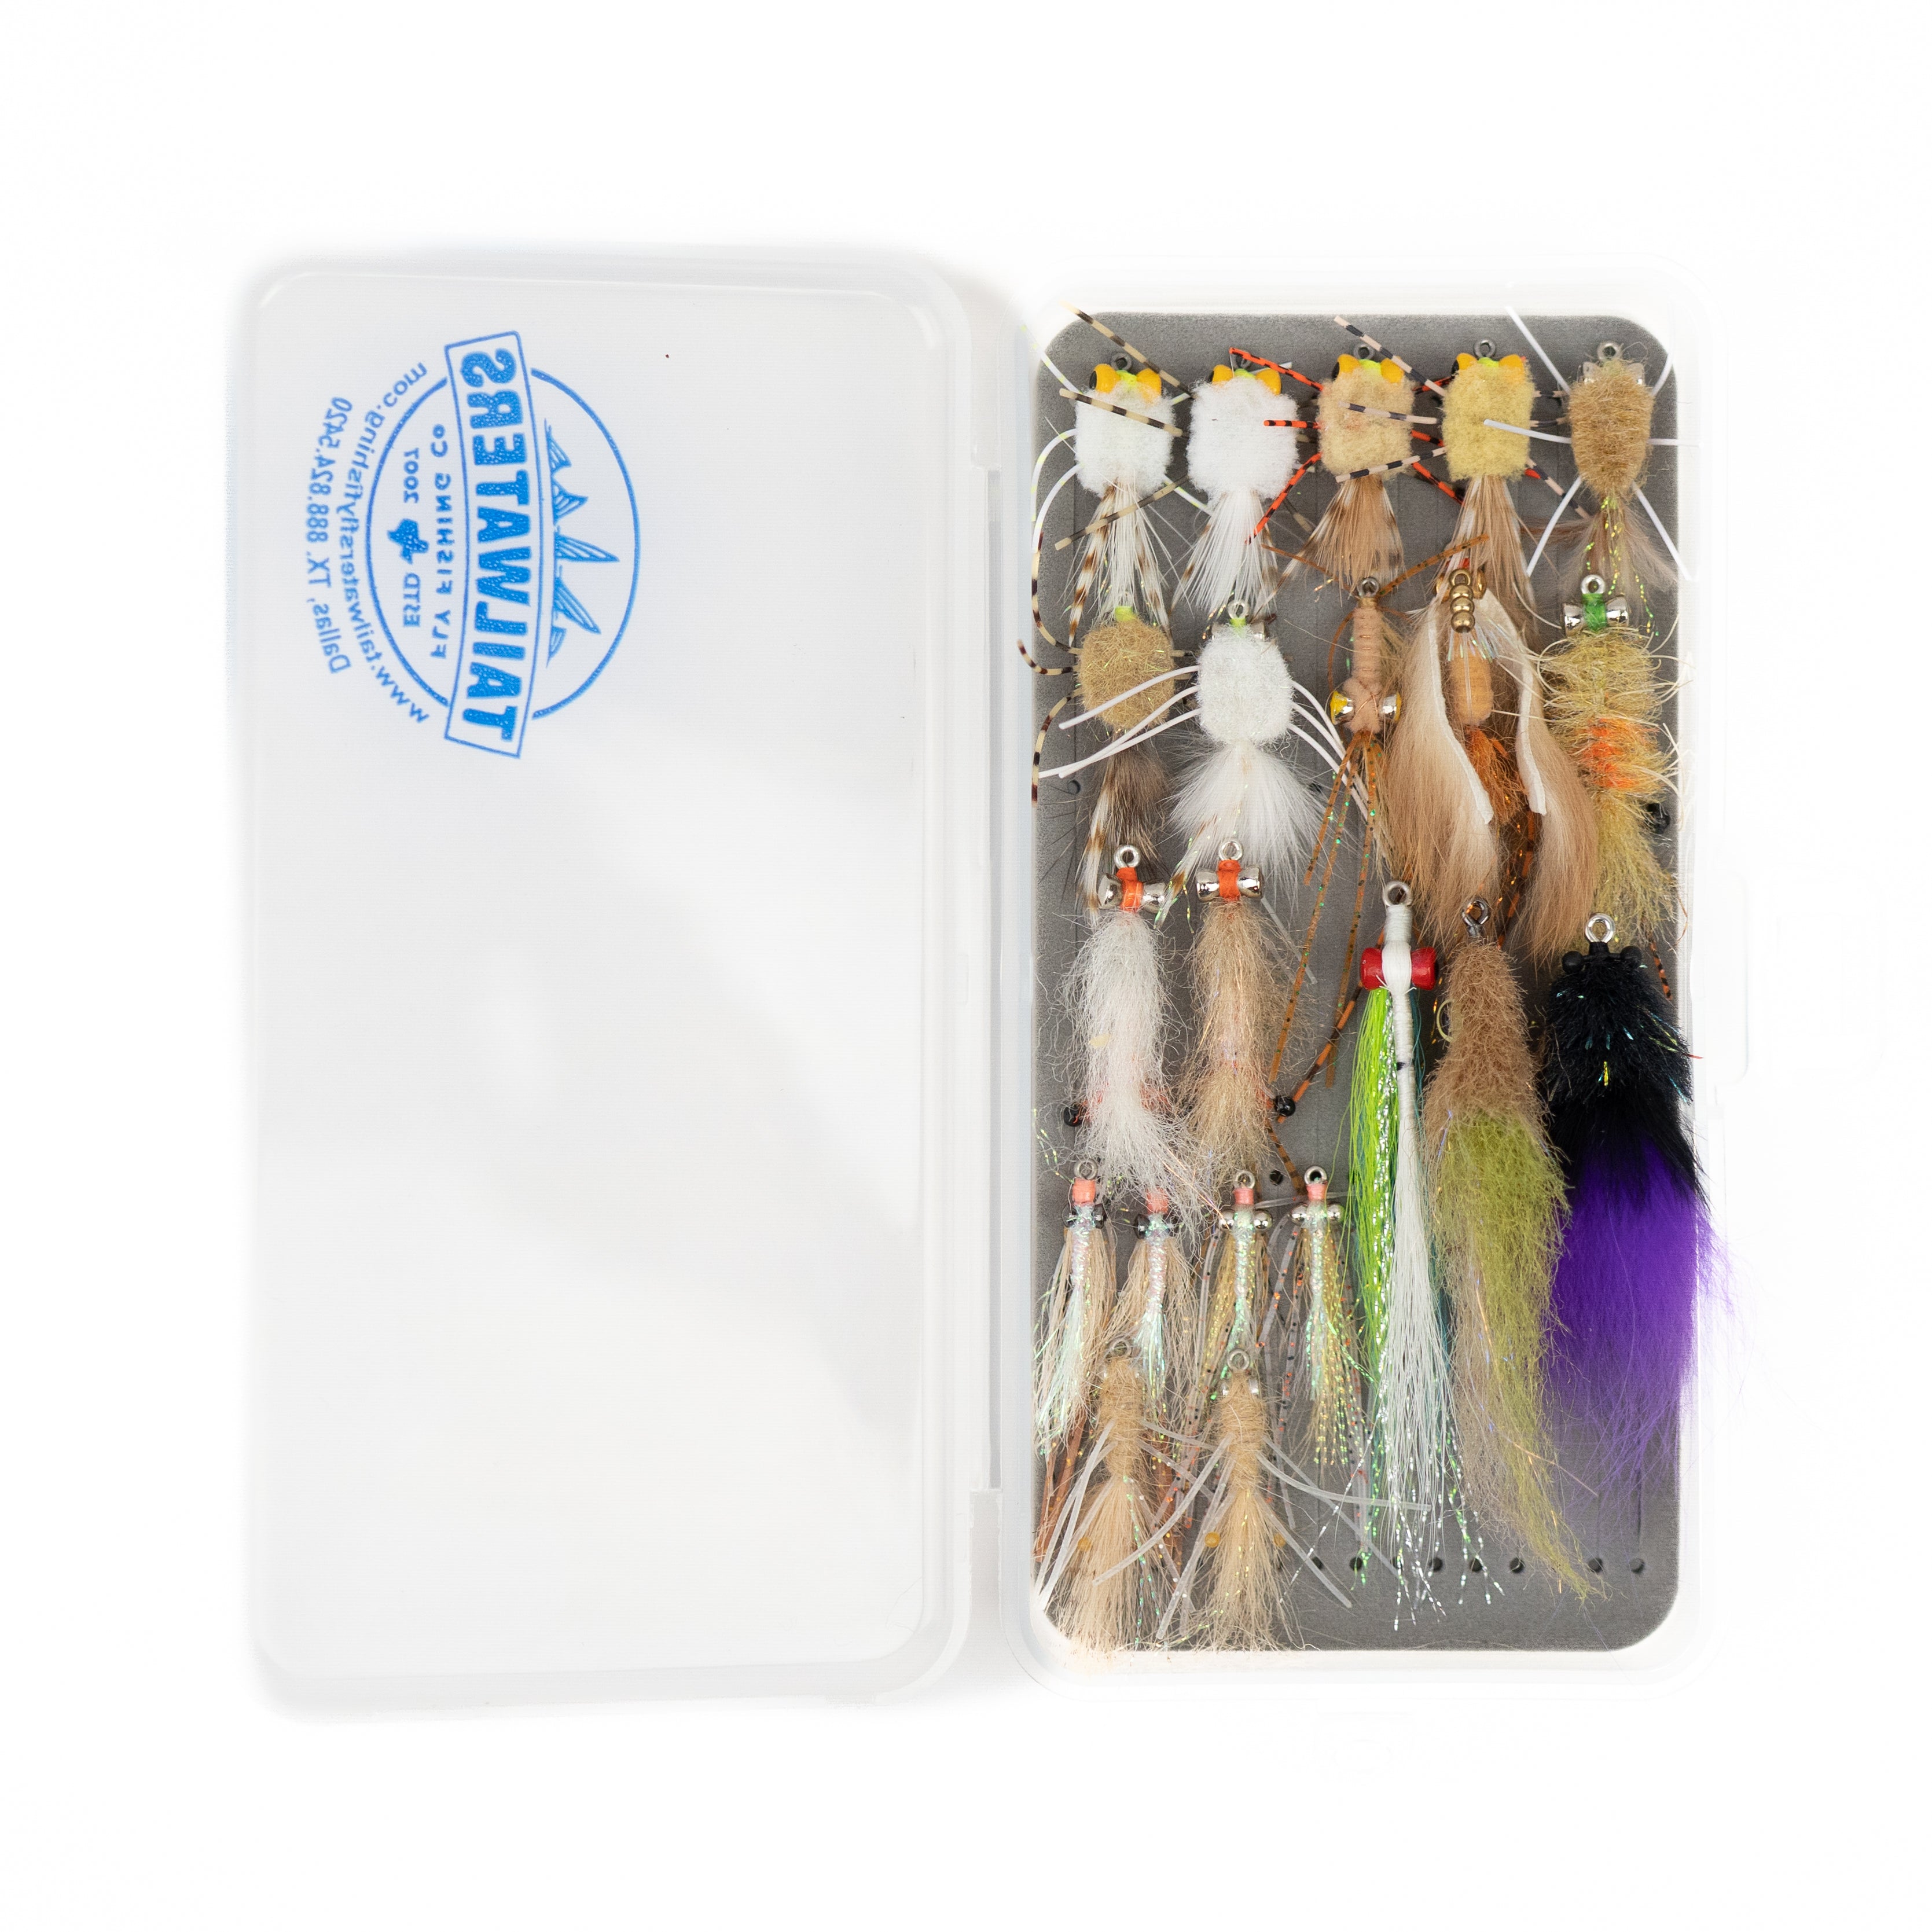 RIO Saltwater Fly Leader Tapered Single or 3 Pack - 10 Ft Long - 8lb to 40lb